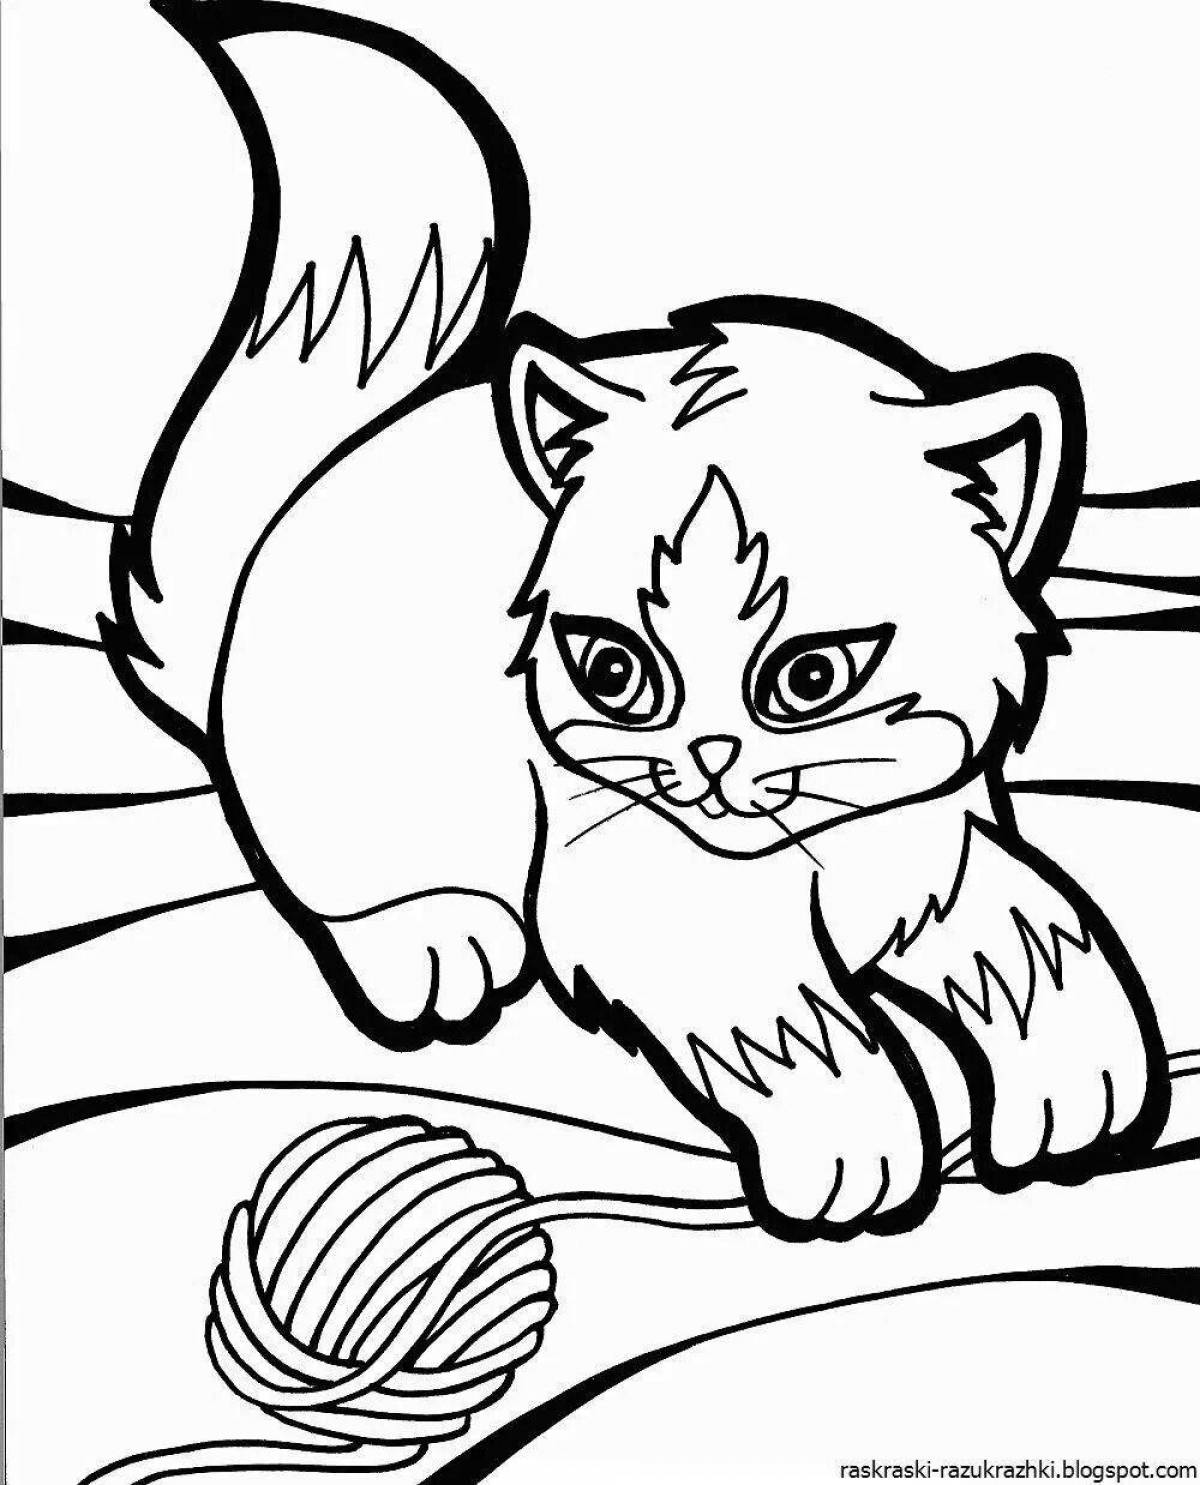 Exciting kitty coloring book for kids